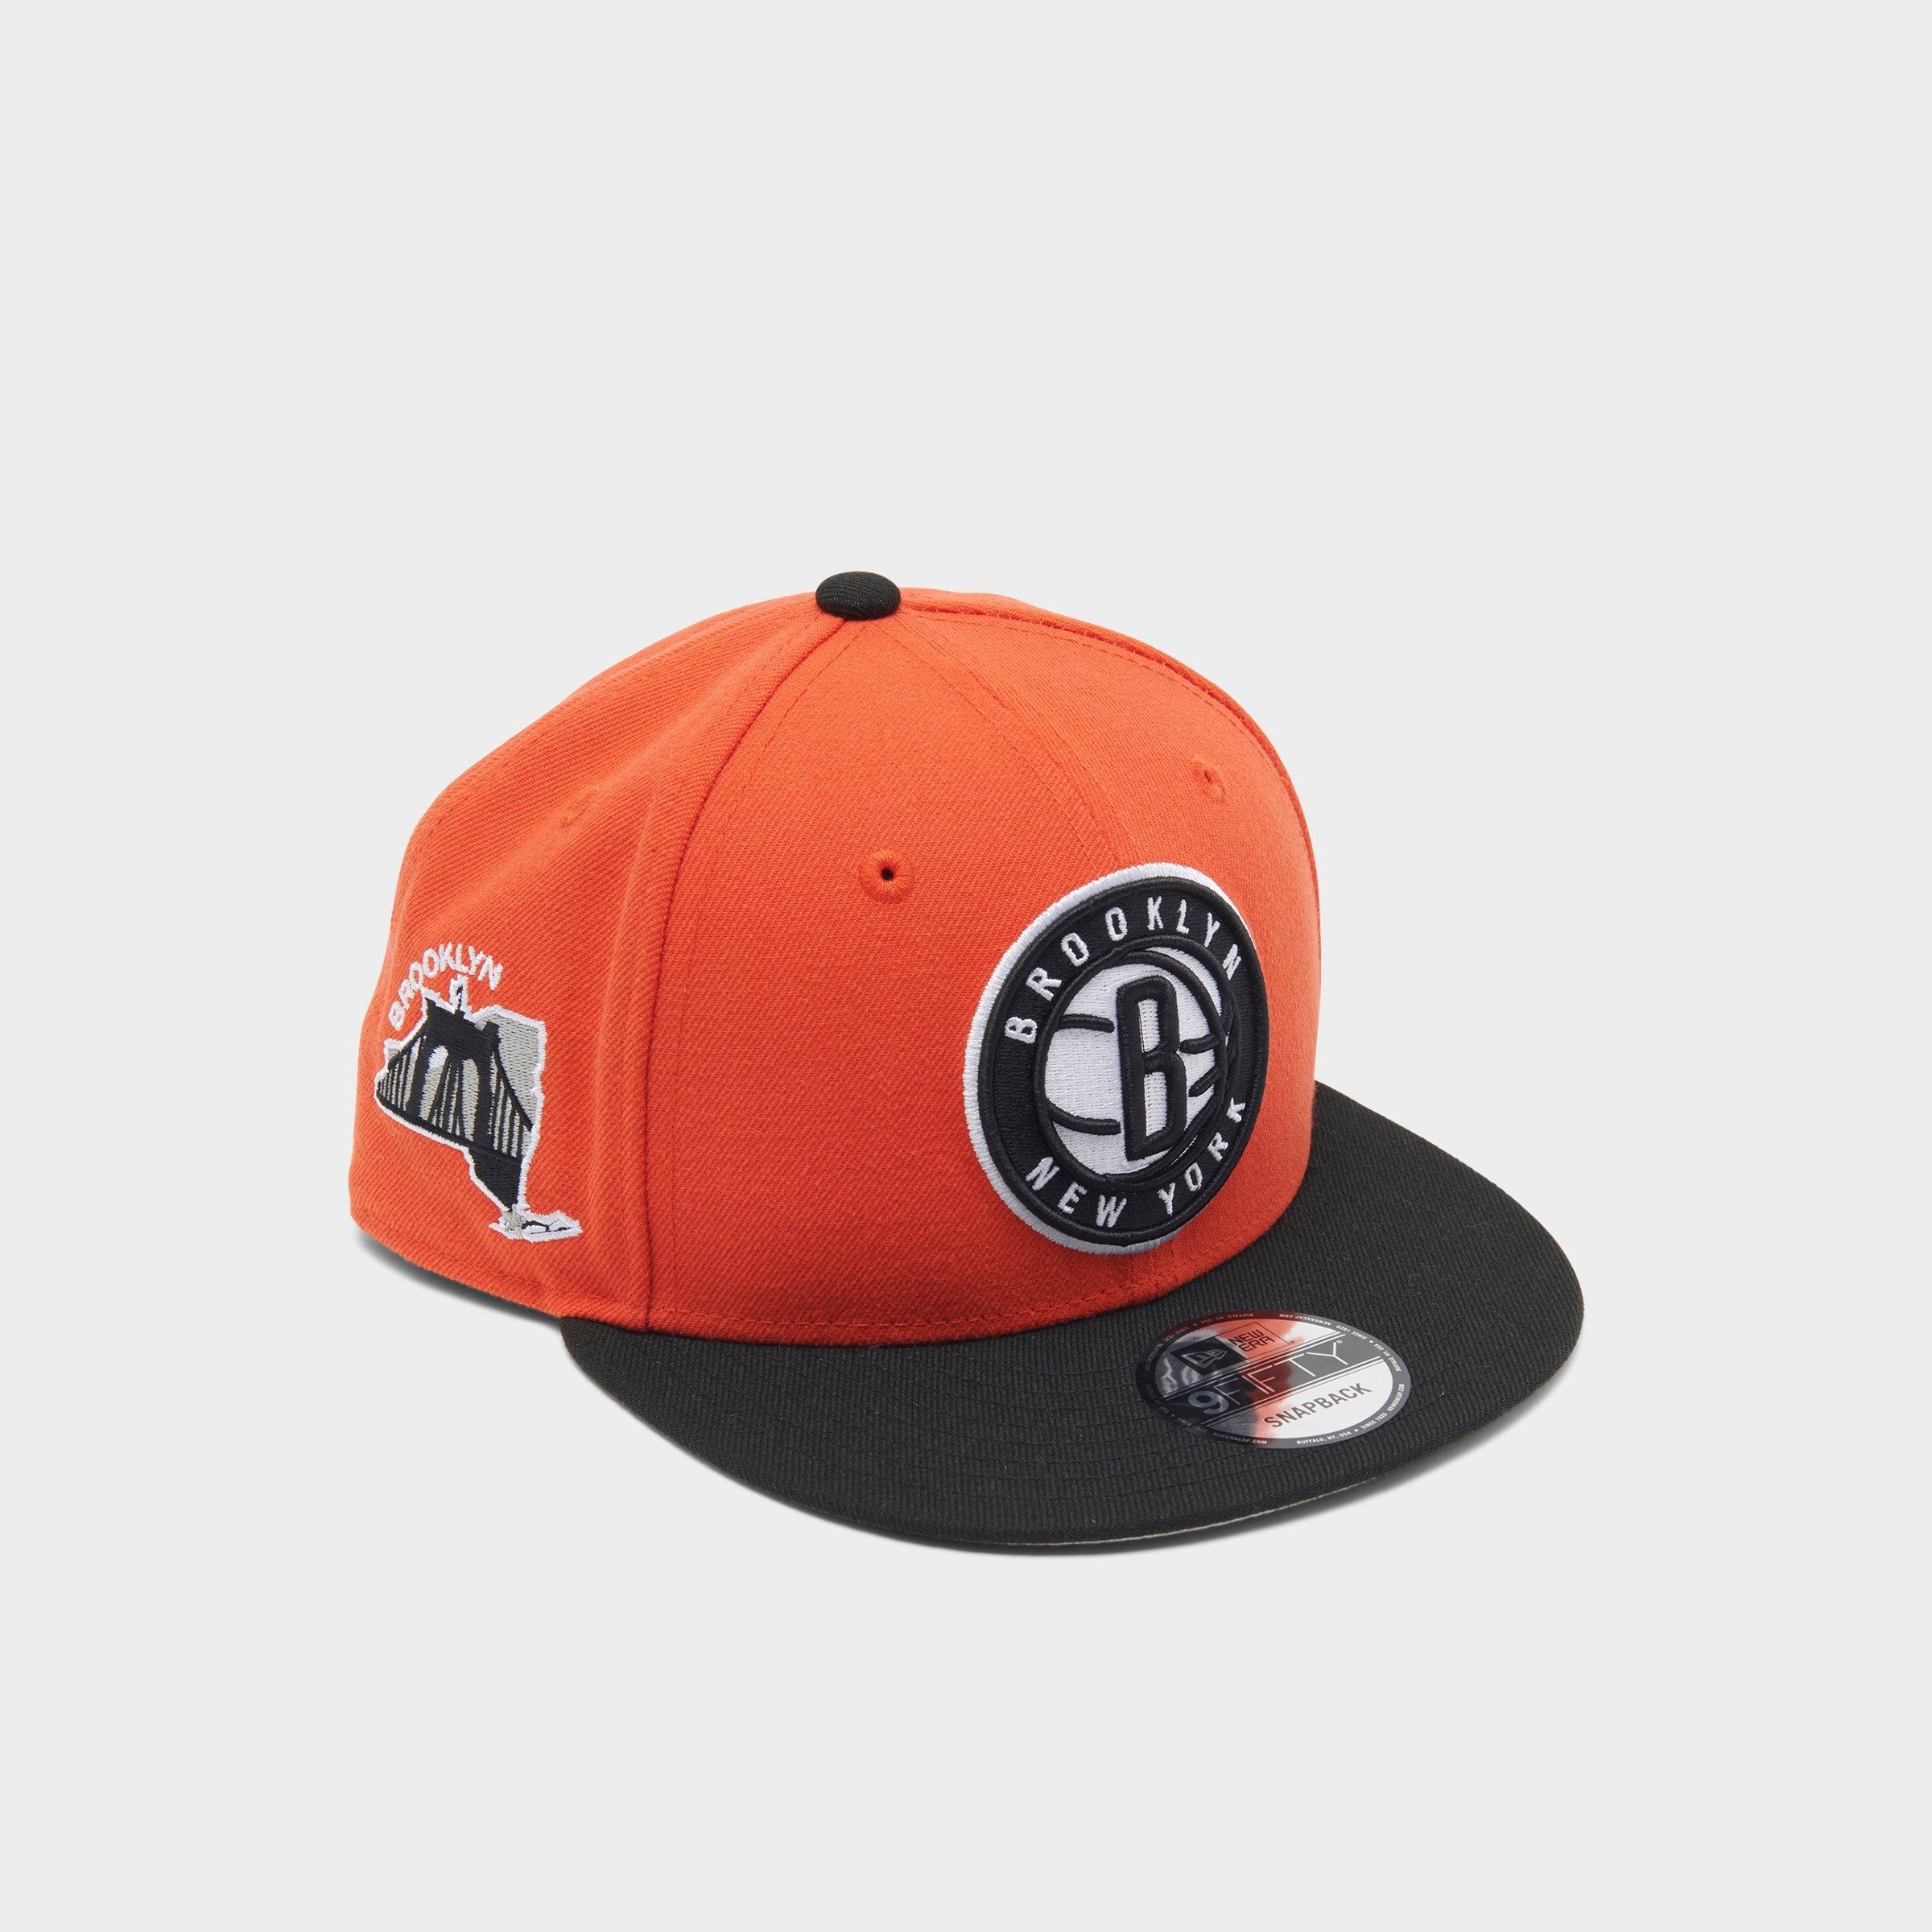 Official Brooklyn Nets Hat 125399: Buy Online on Offer